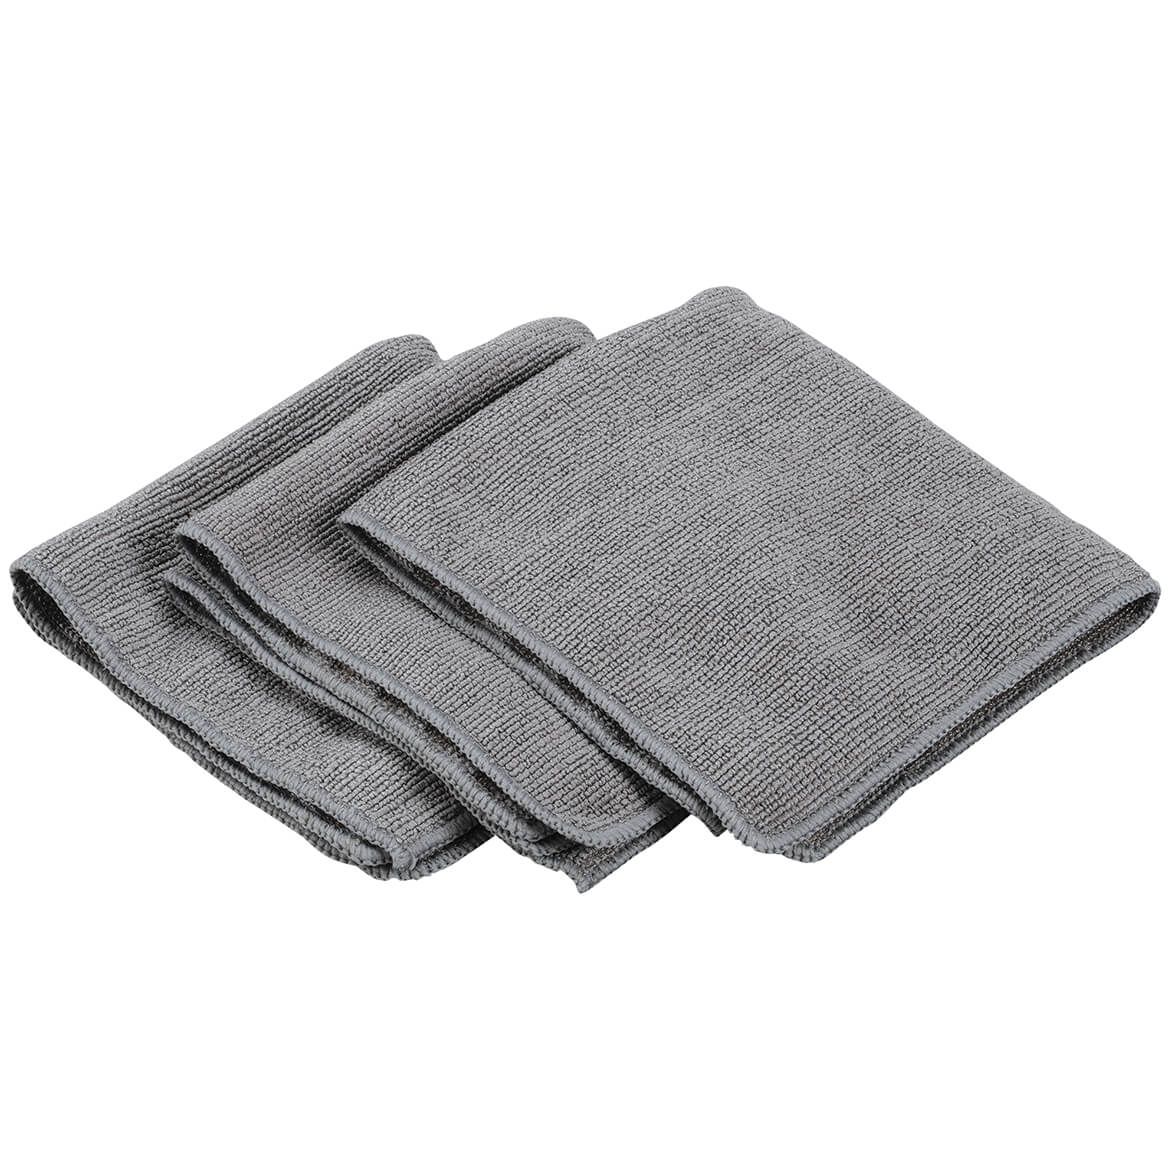 Stainless Steel Cleaning Cloths, Set of 3 + '-' + 370895